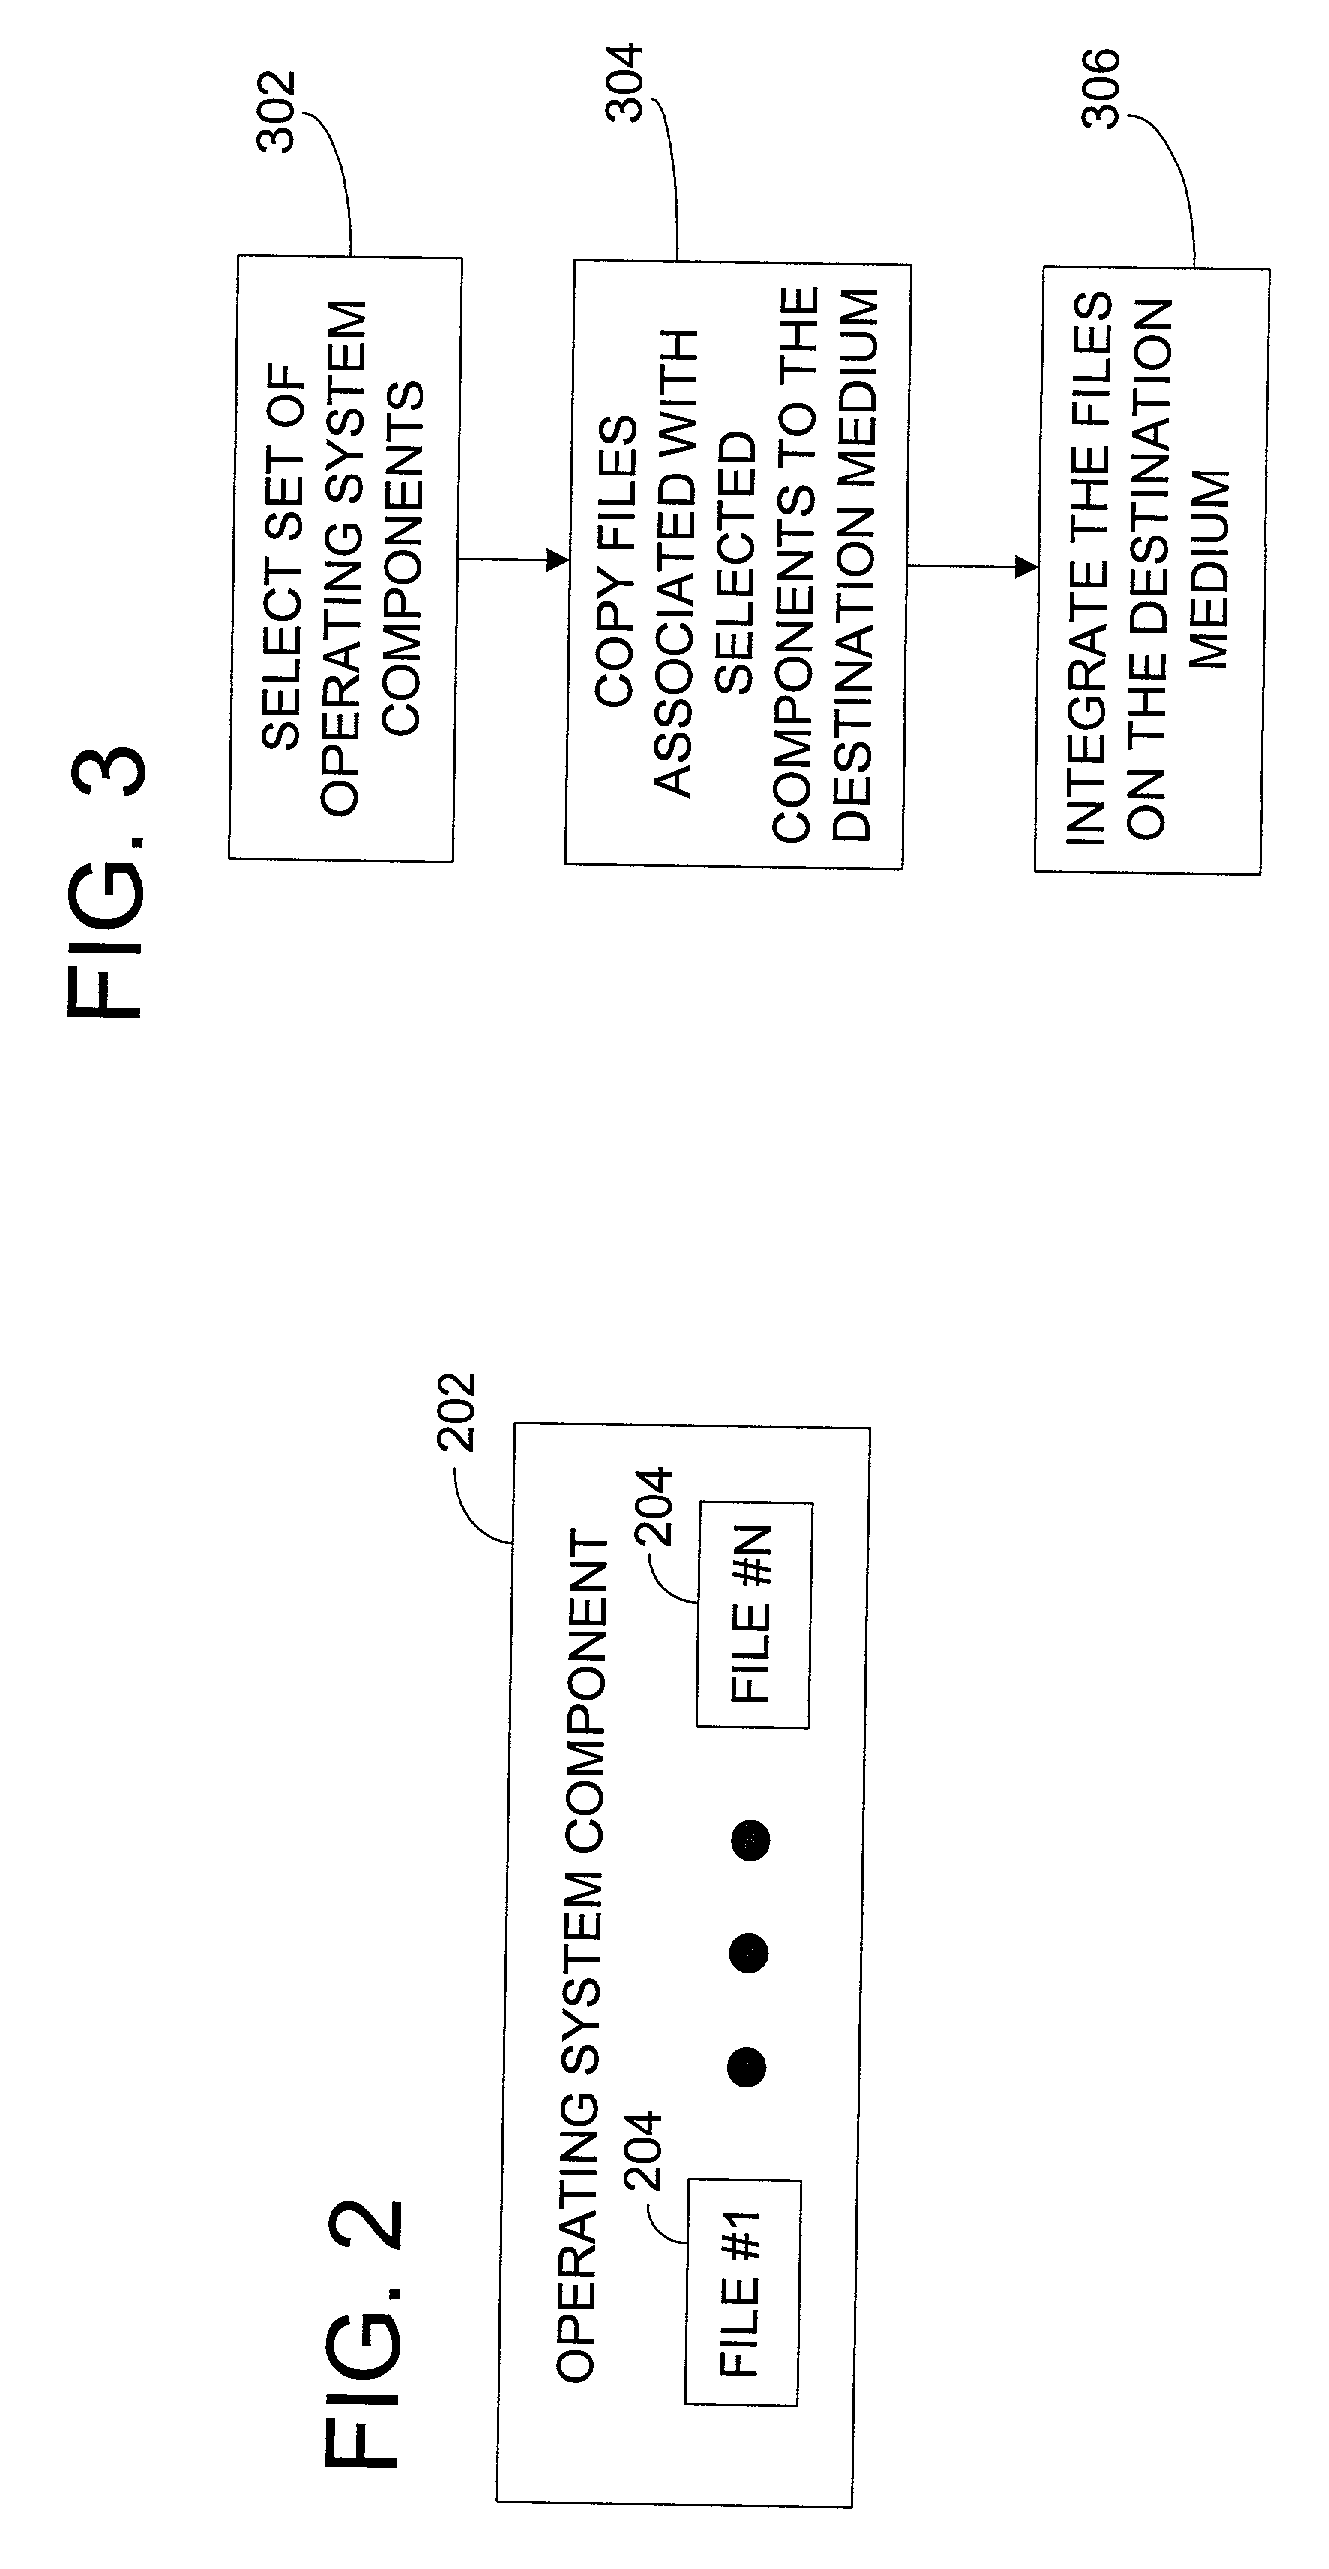 Method and system for creating and employing an operating system having selected functionality